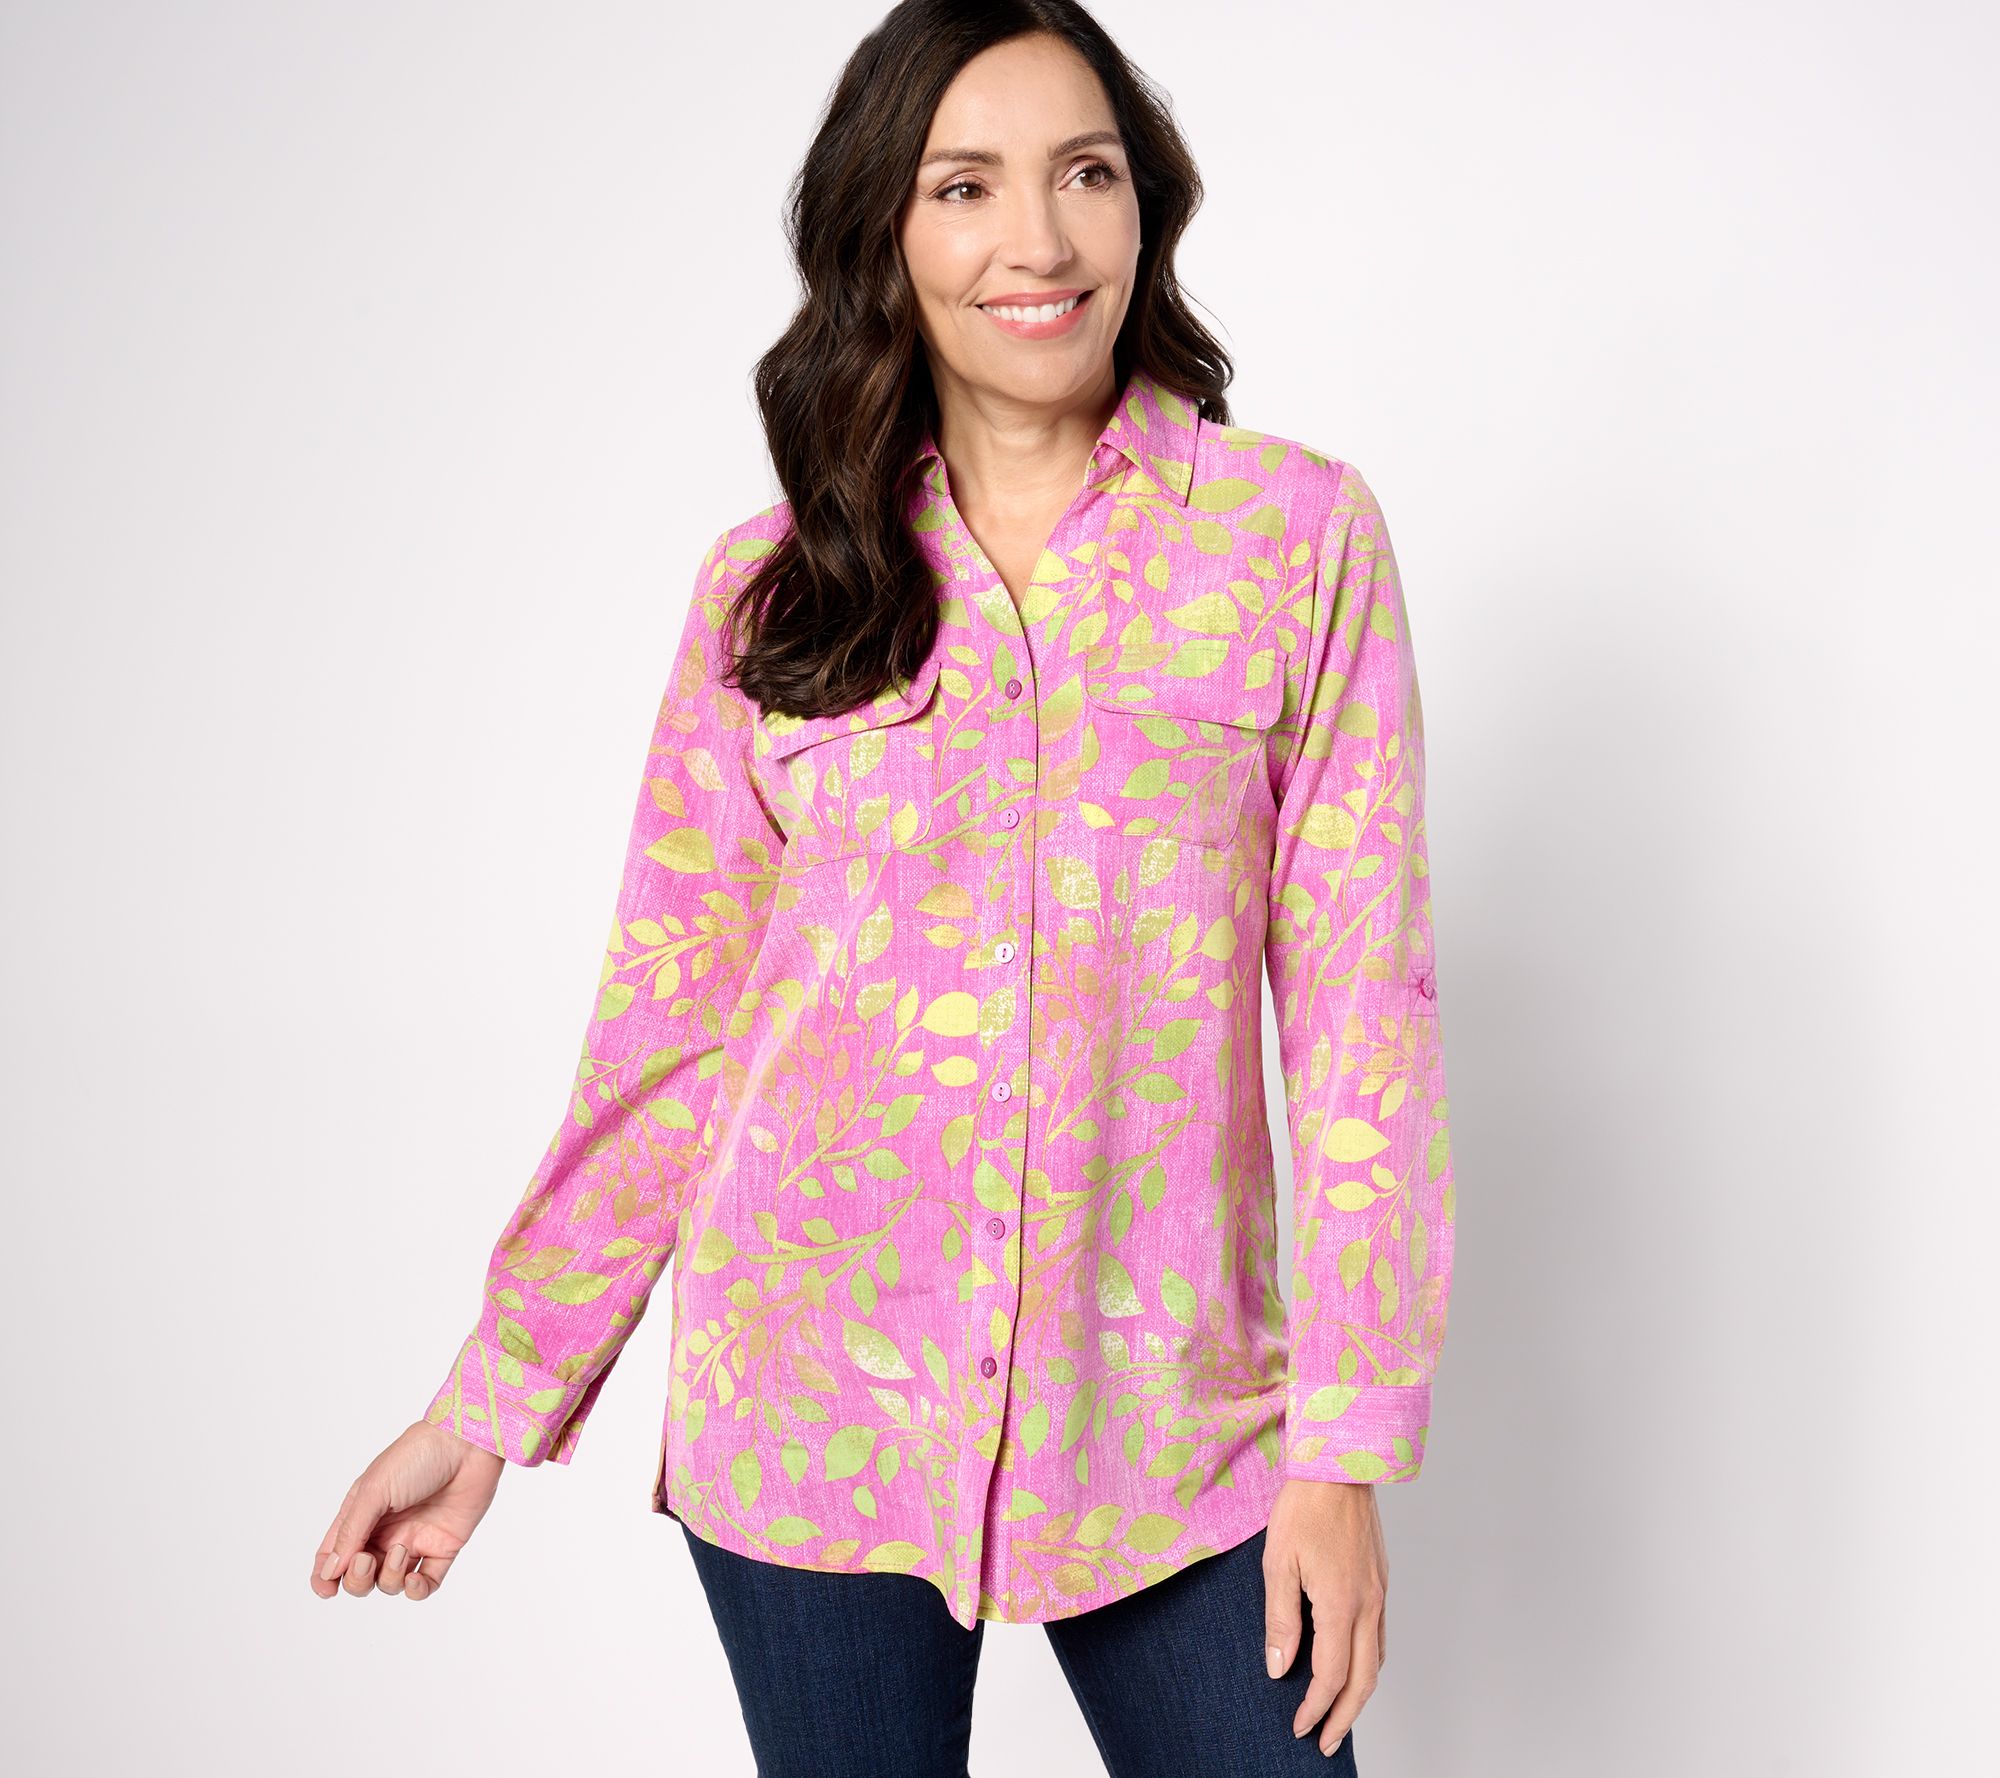 Denim & Co. Printed Woven Button Front Roll Tab Sleeve Tunic - QVC.com